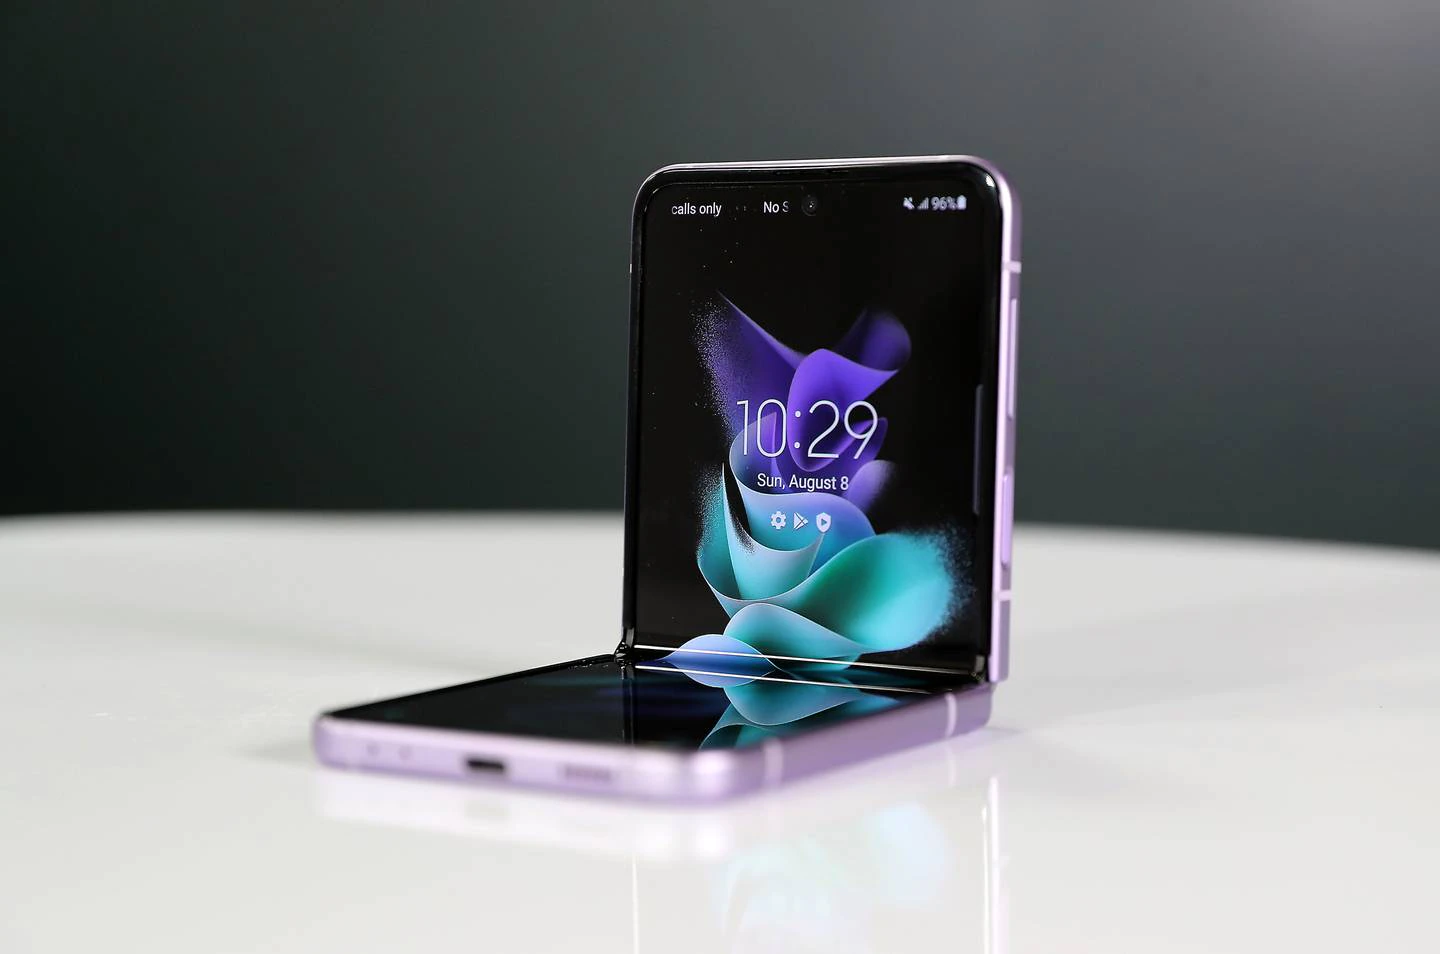 Samsung launches new Galaxy Z Fold 3 and Flip 3 foldable phones